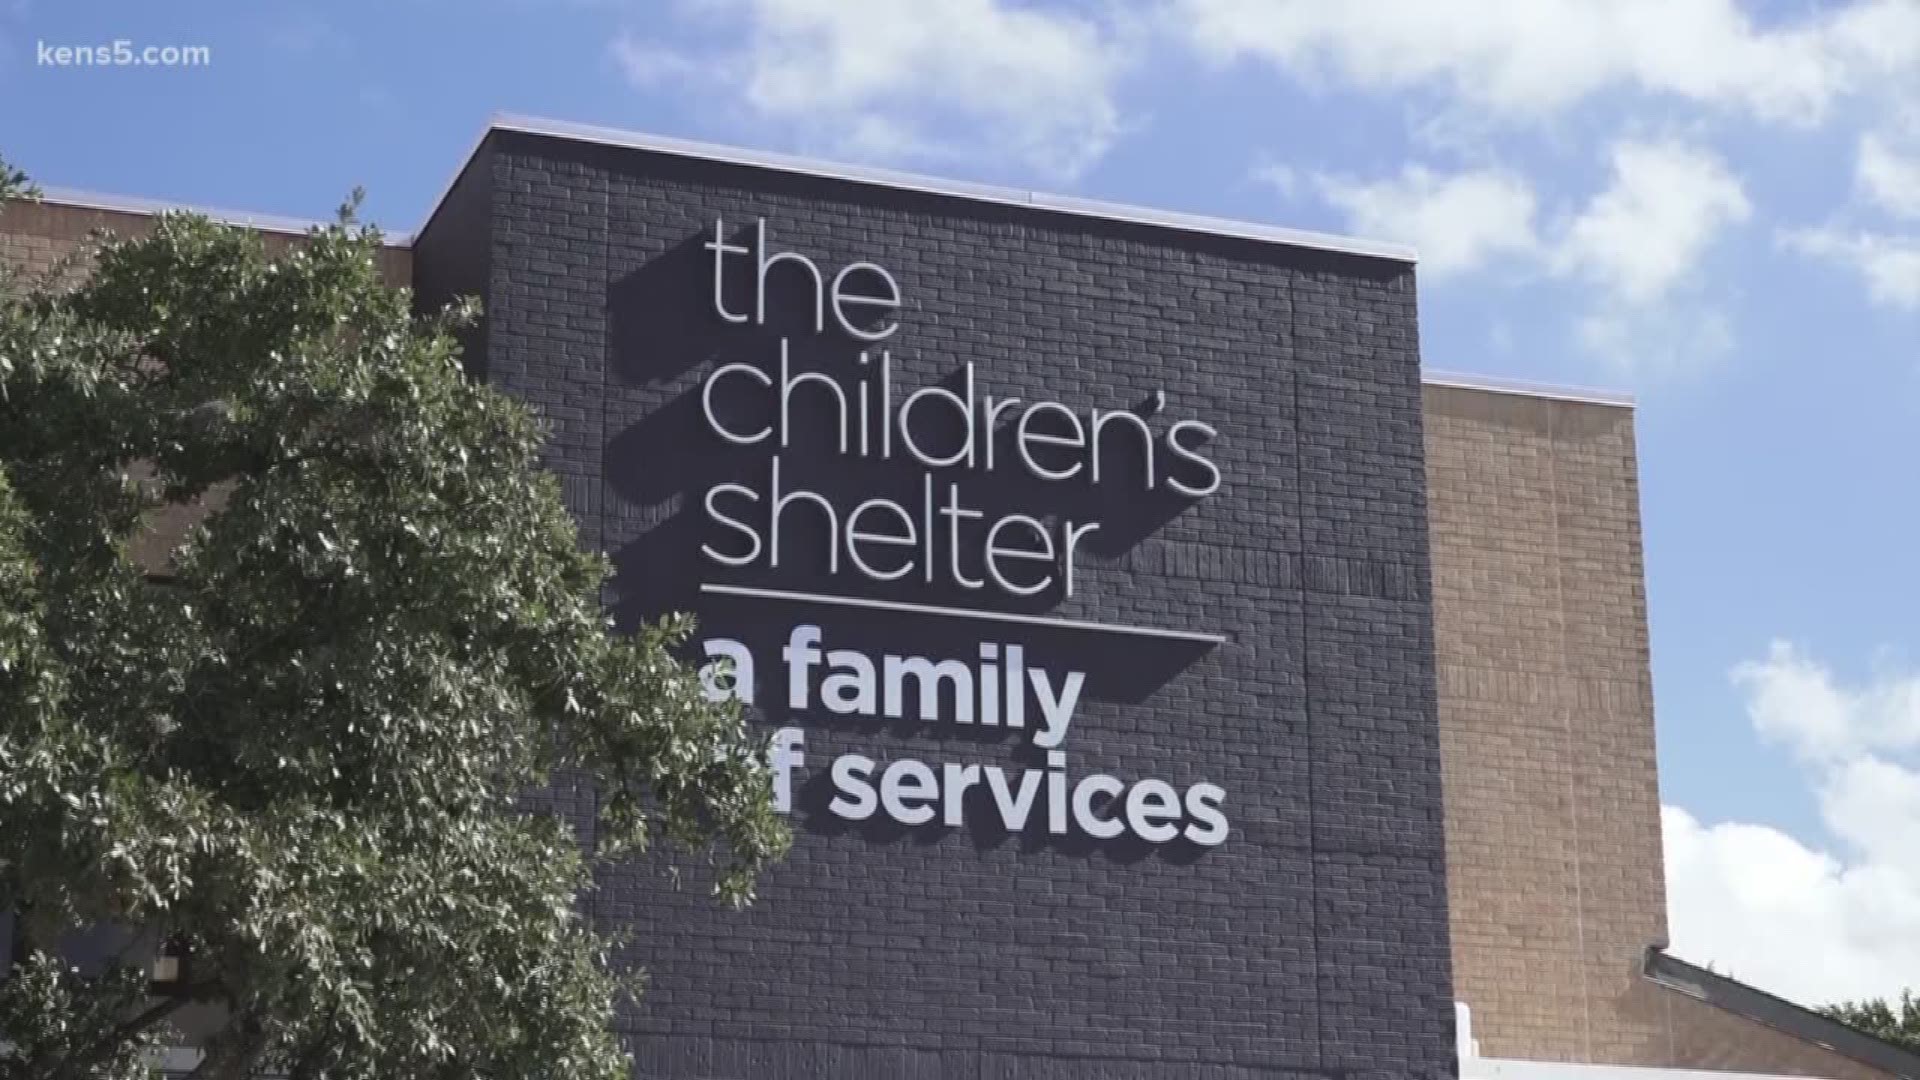 A new program launched by the Children's Shelter of San Antonio will help recruit more families to take in children in need of foster care.